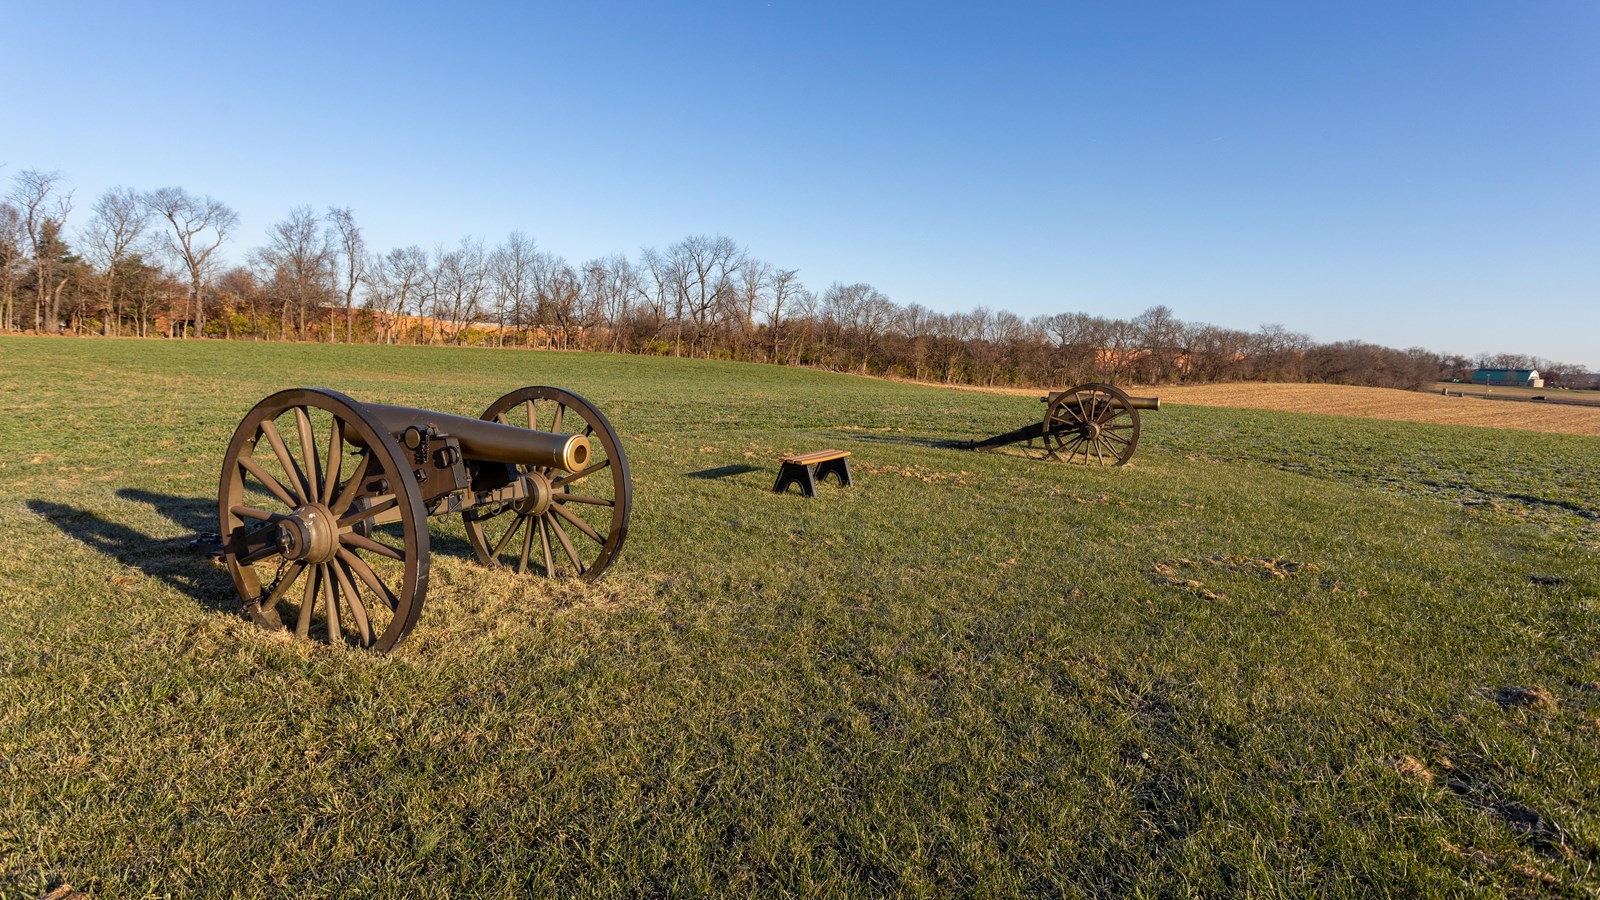 Two canons on a grassy field. 